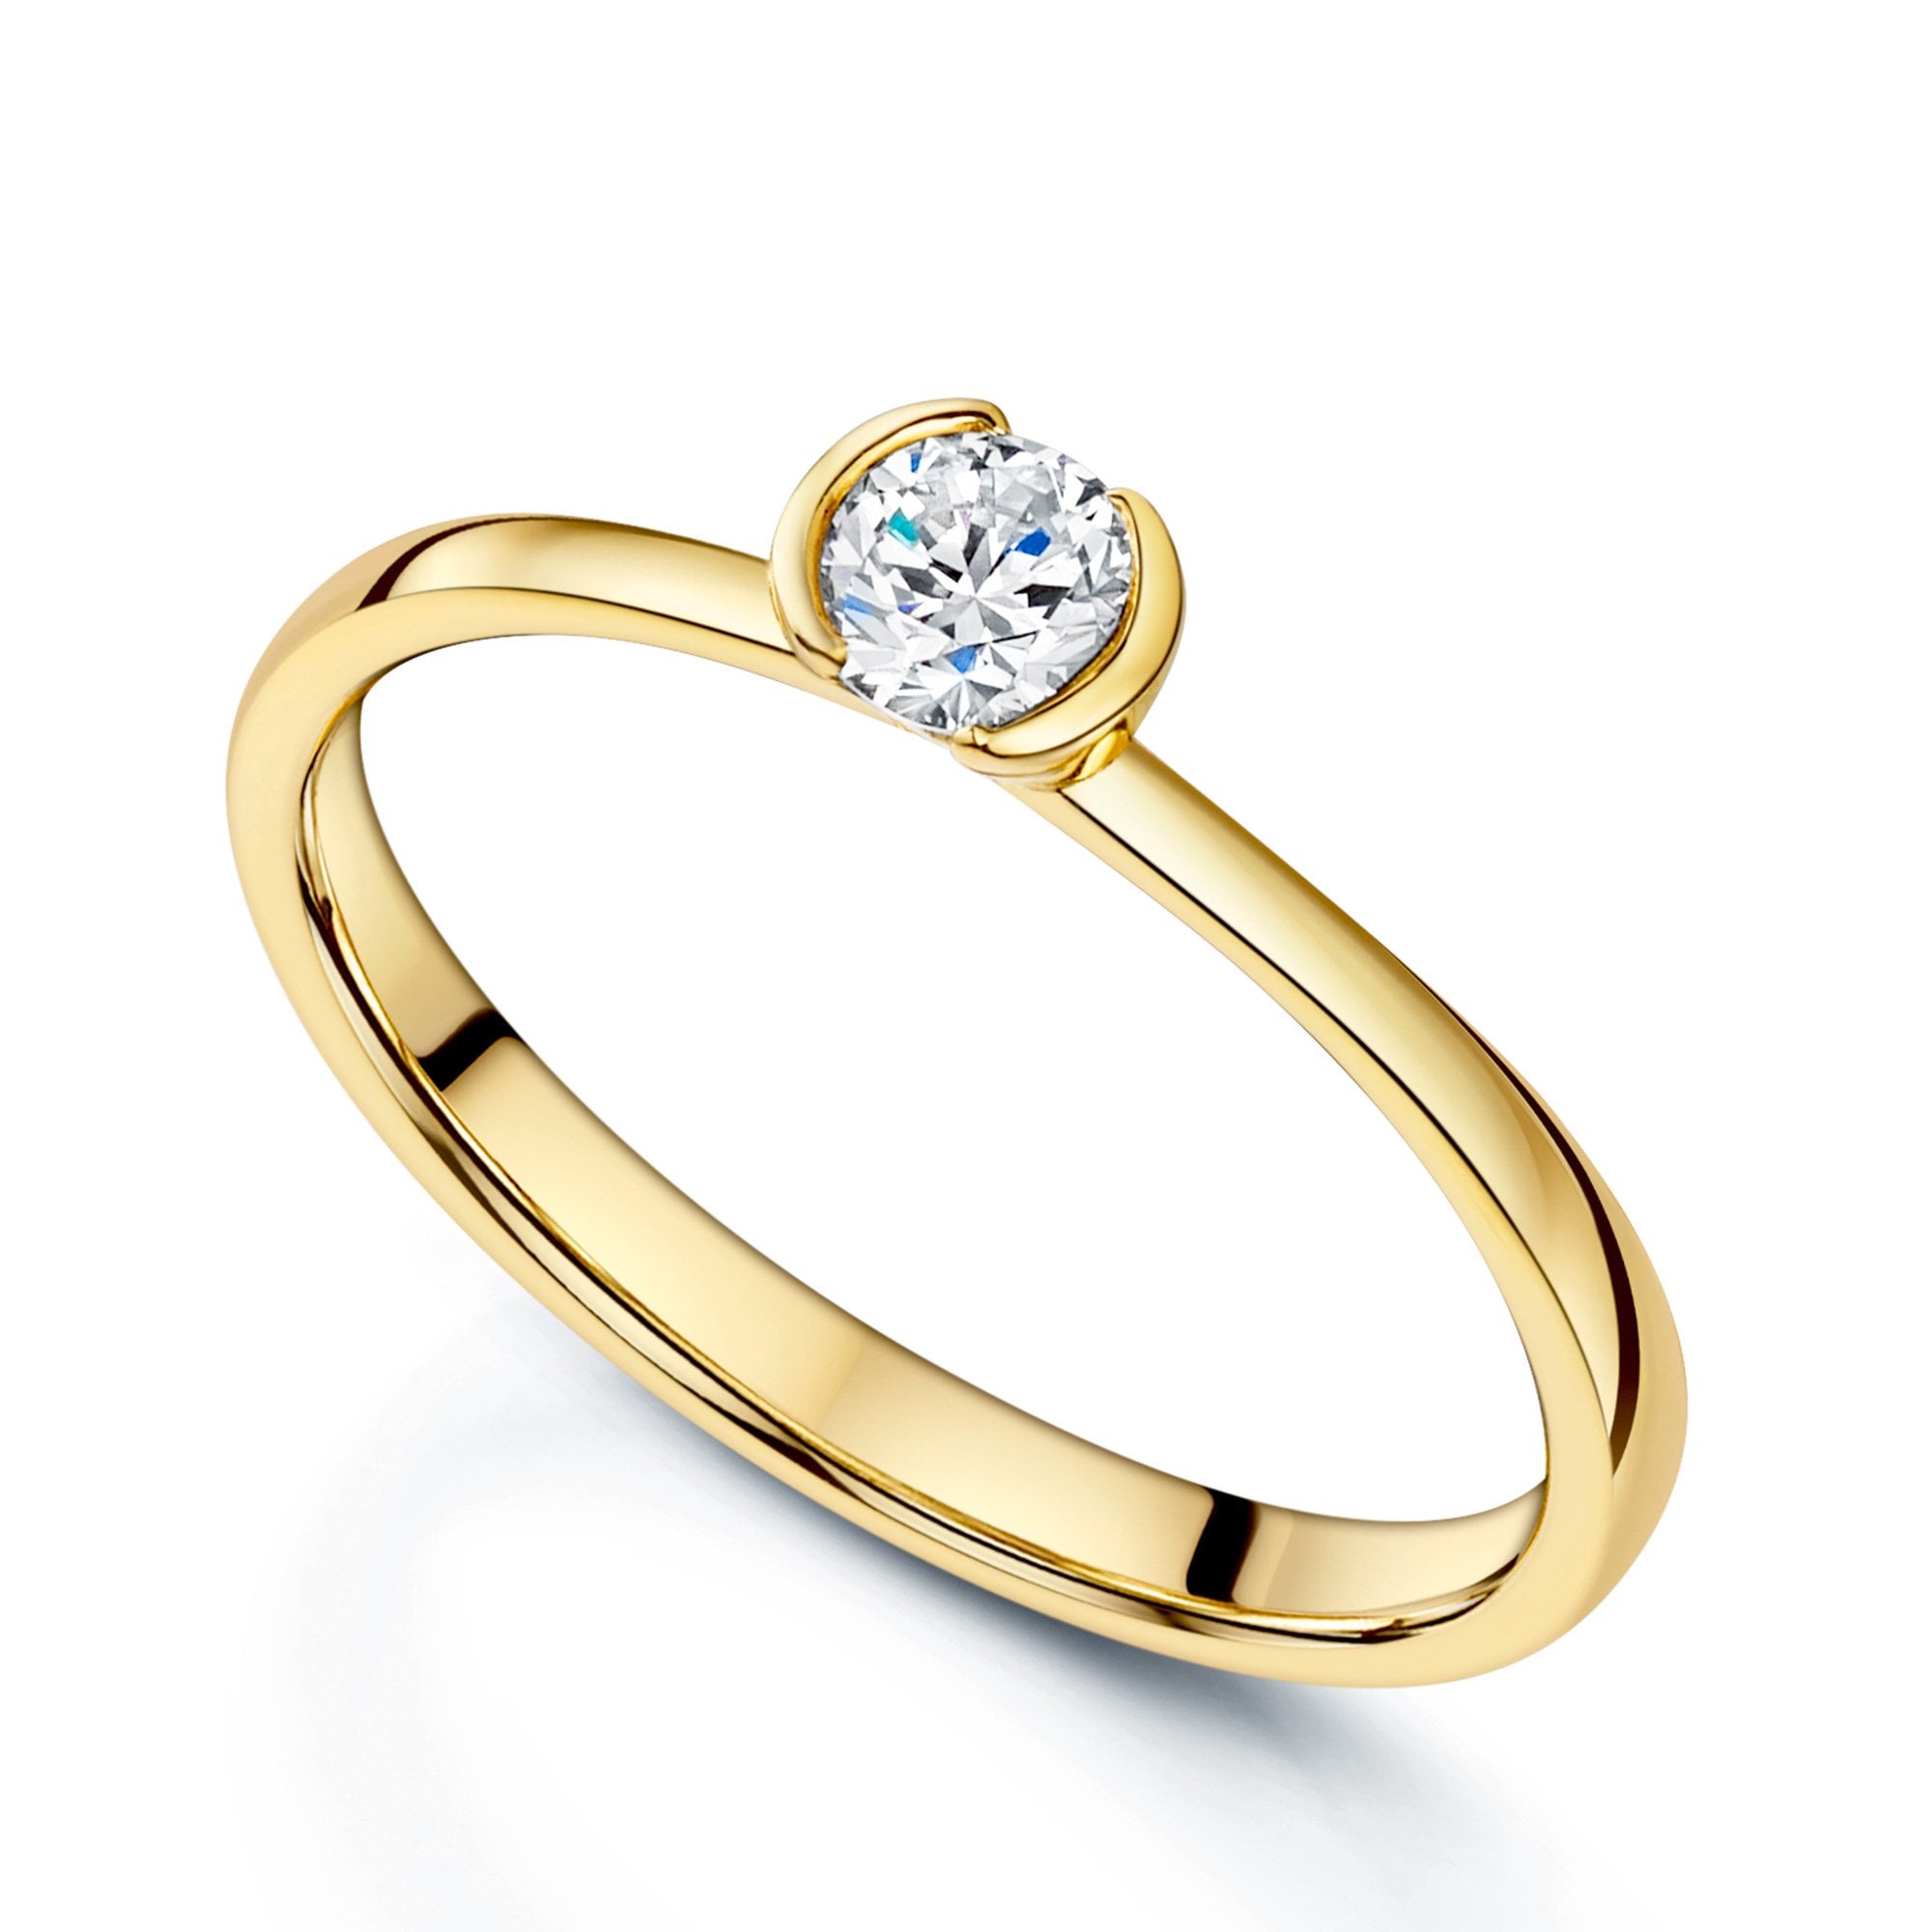 18ct Yellow Gold 0.25 Carat Round Brilliant Cut Diamond Solitaire Part Rub Over Tension Set Ring